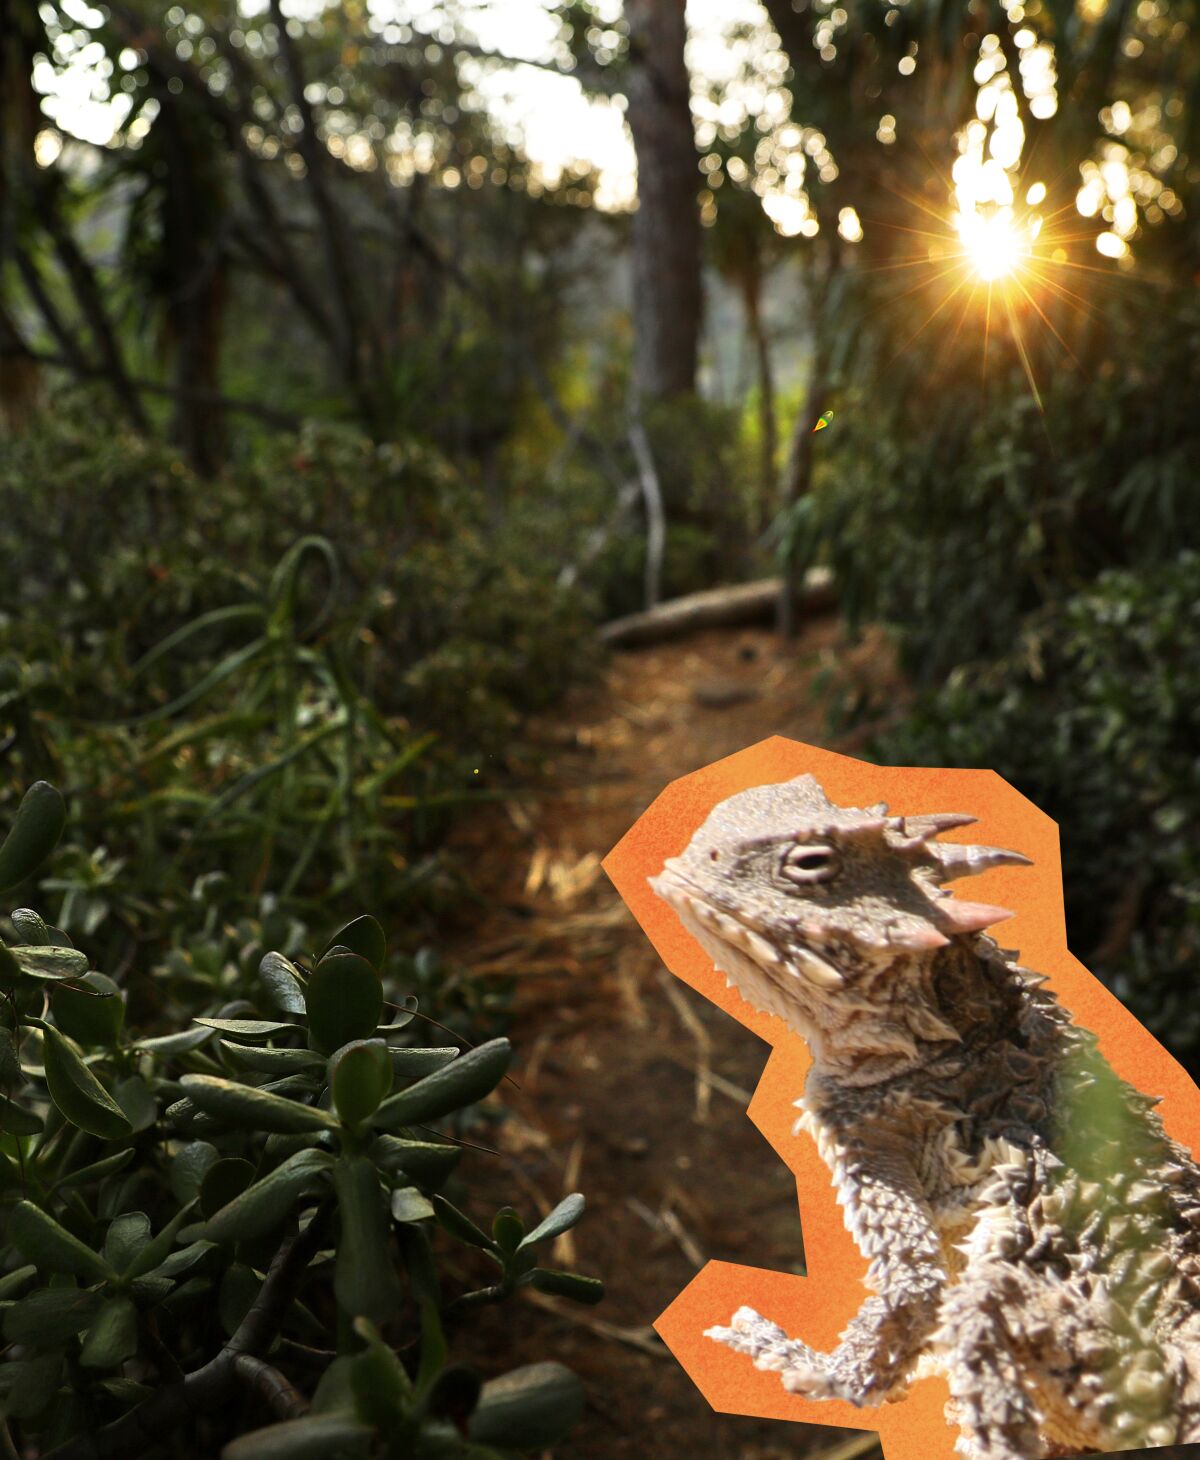 Many crawly creatures, such as the Blainville's horned lizard, call Griffith Park home.